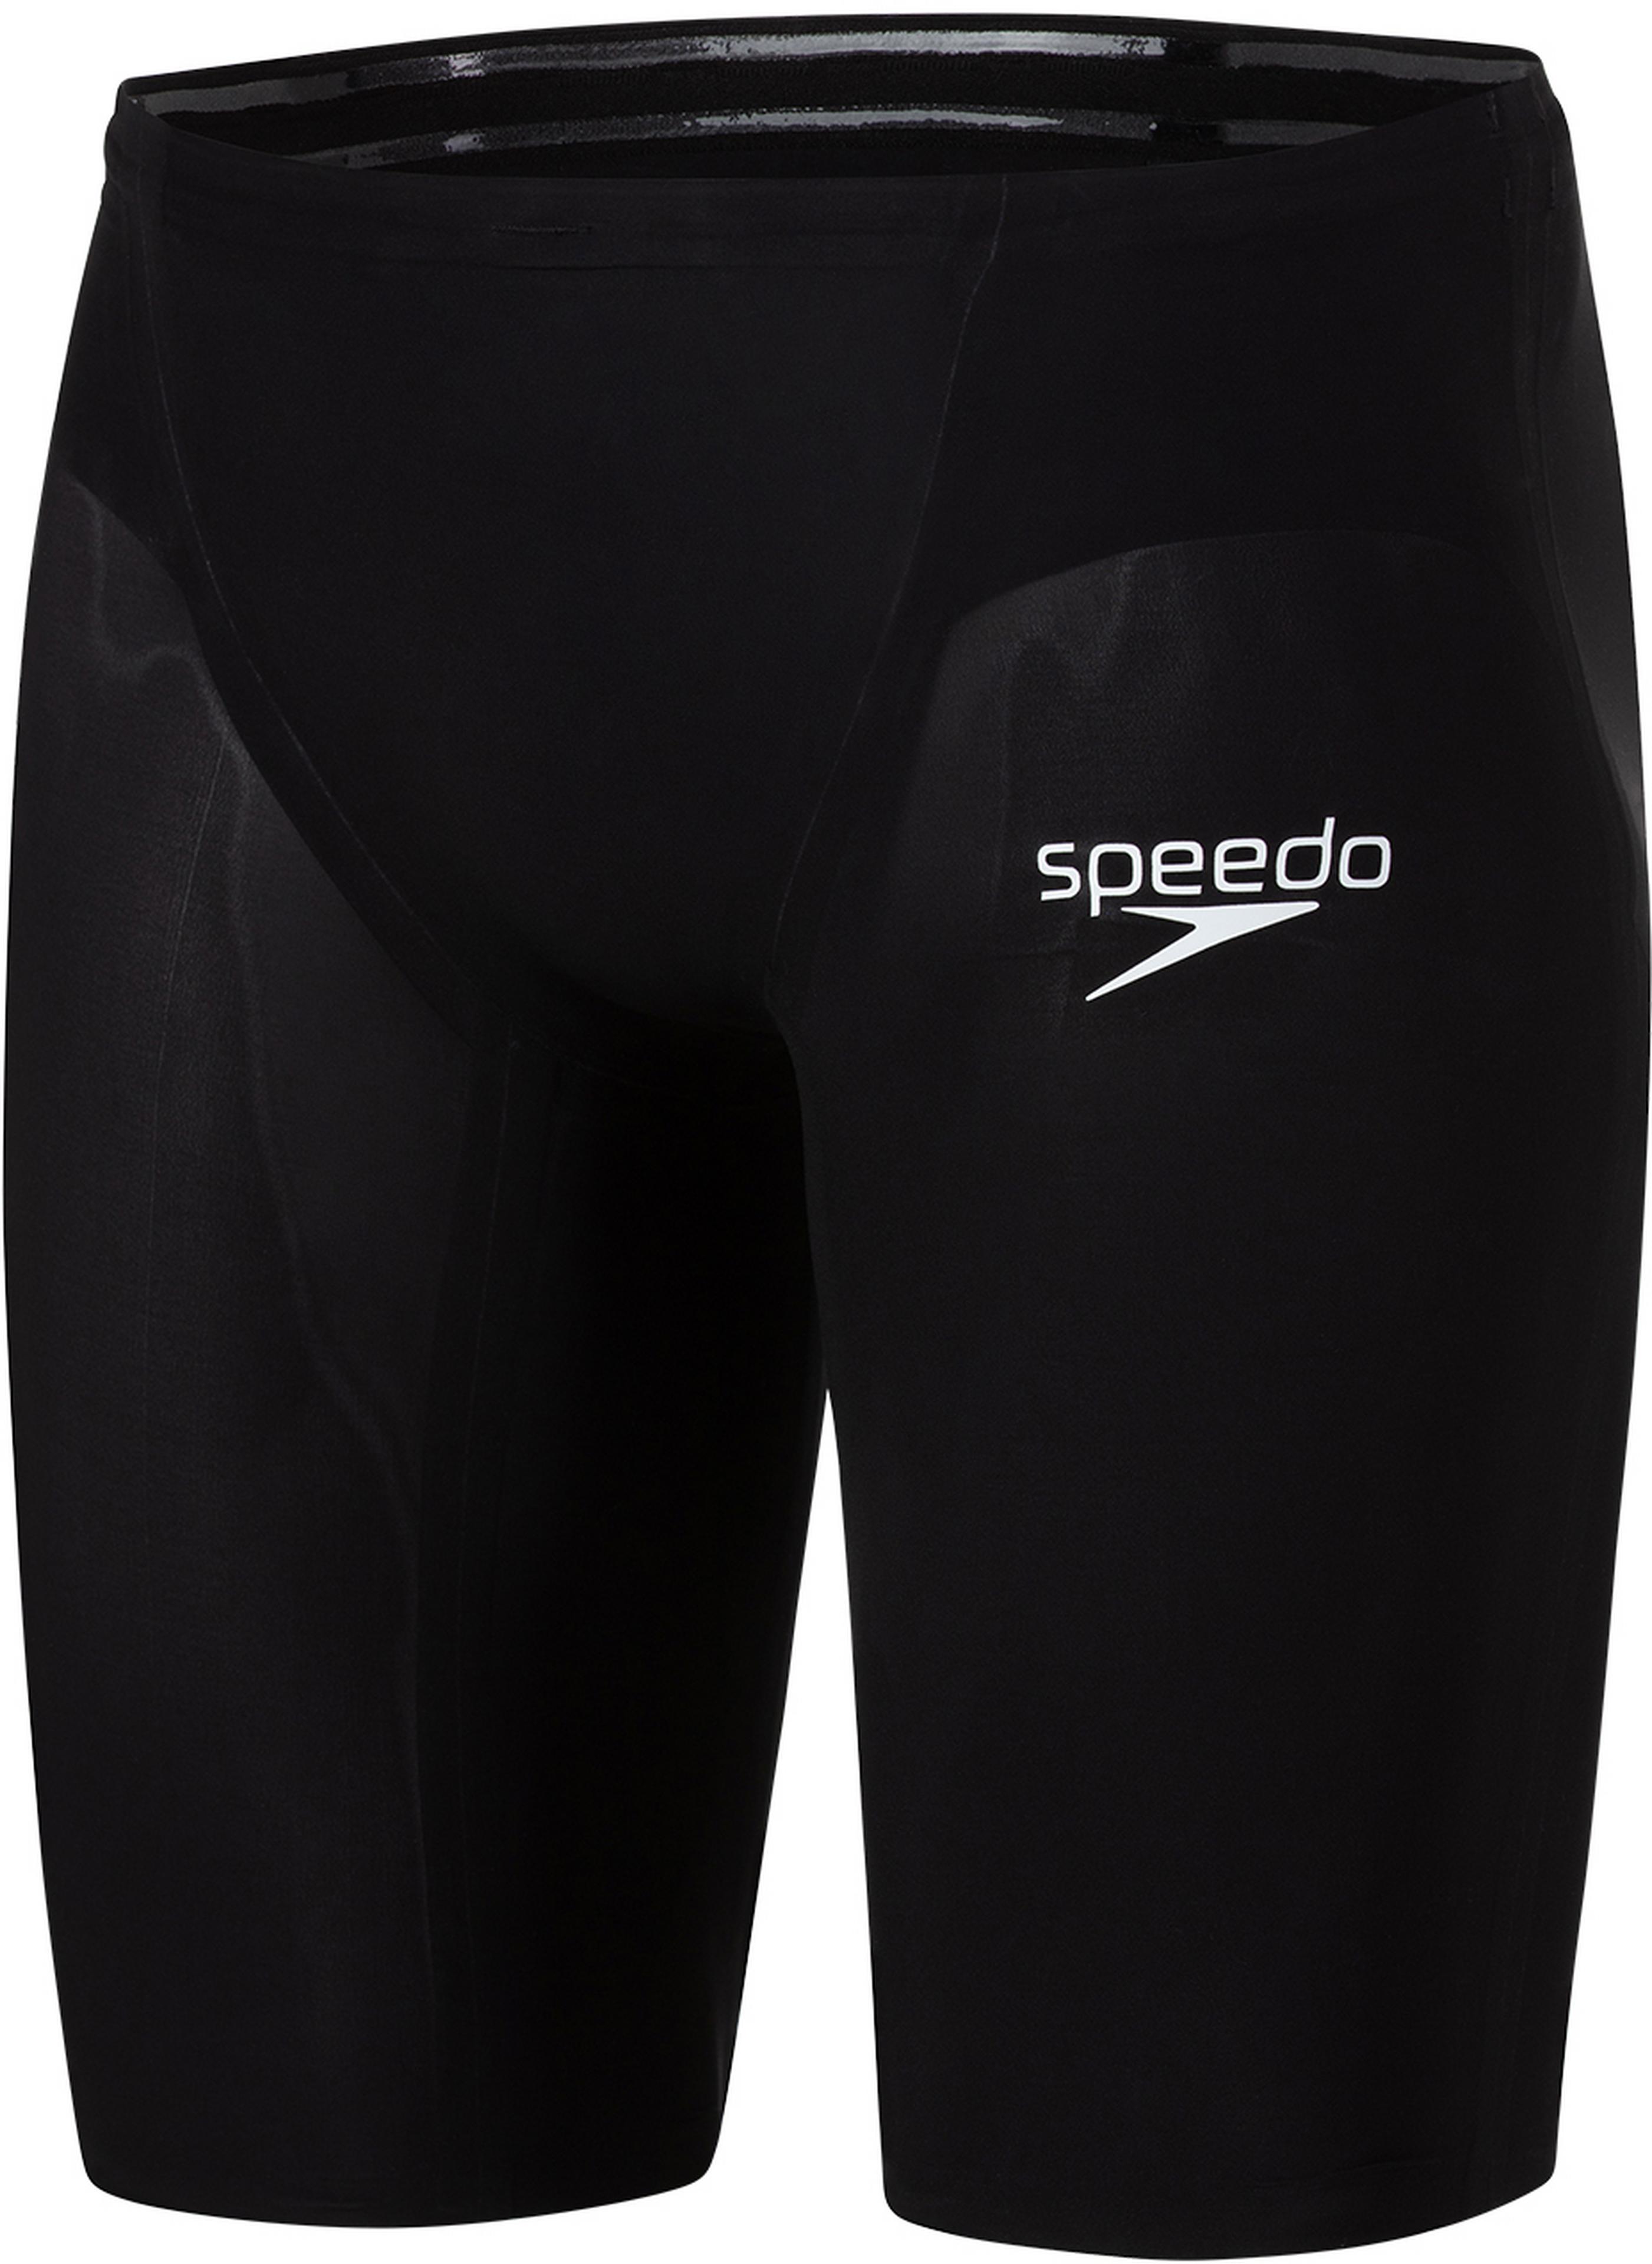 Meet the swimmers who product test Speedo Fastskin 